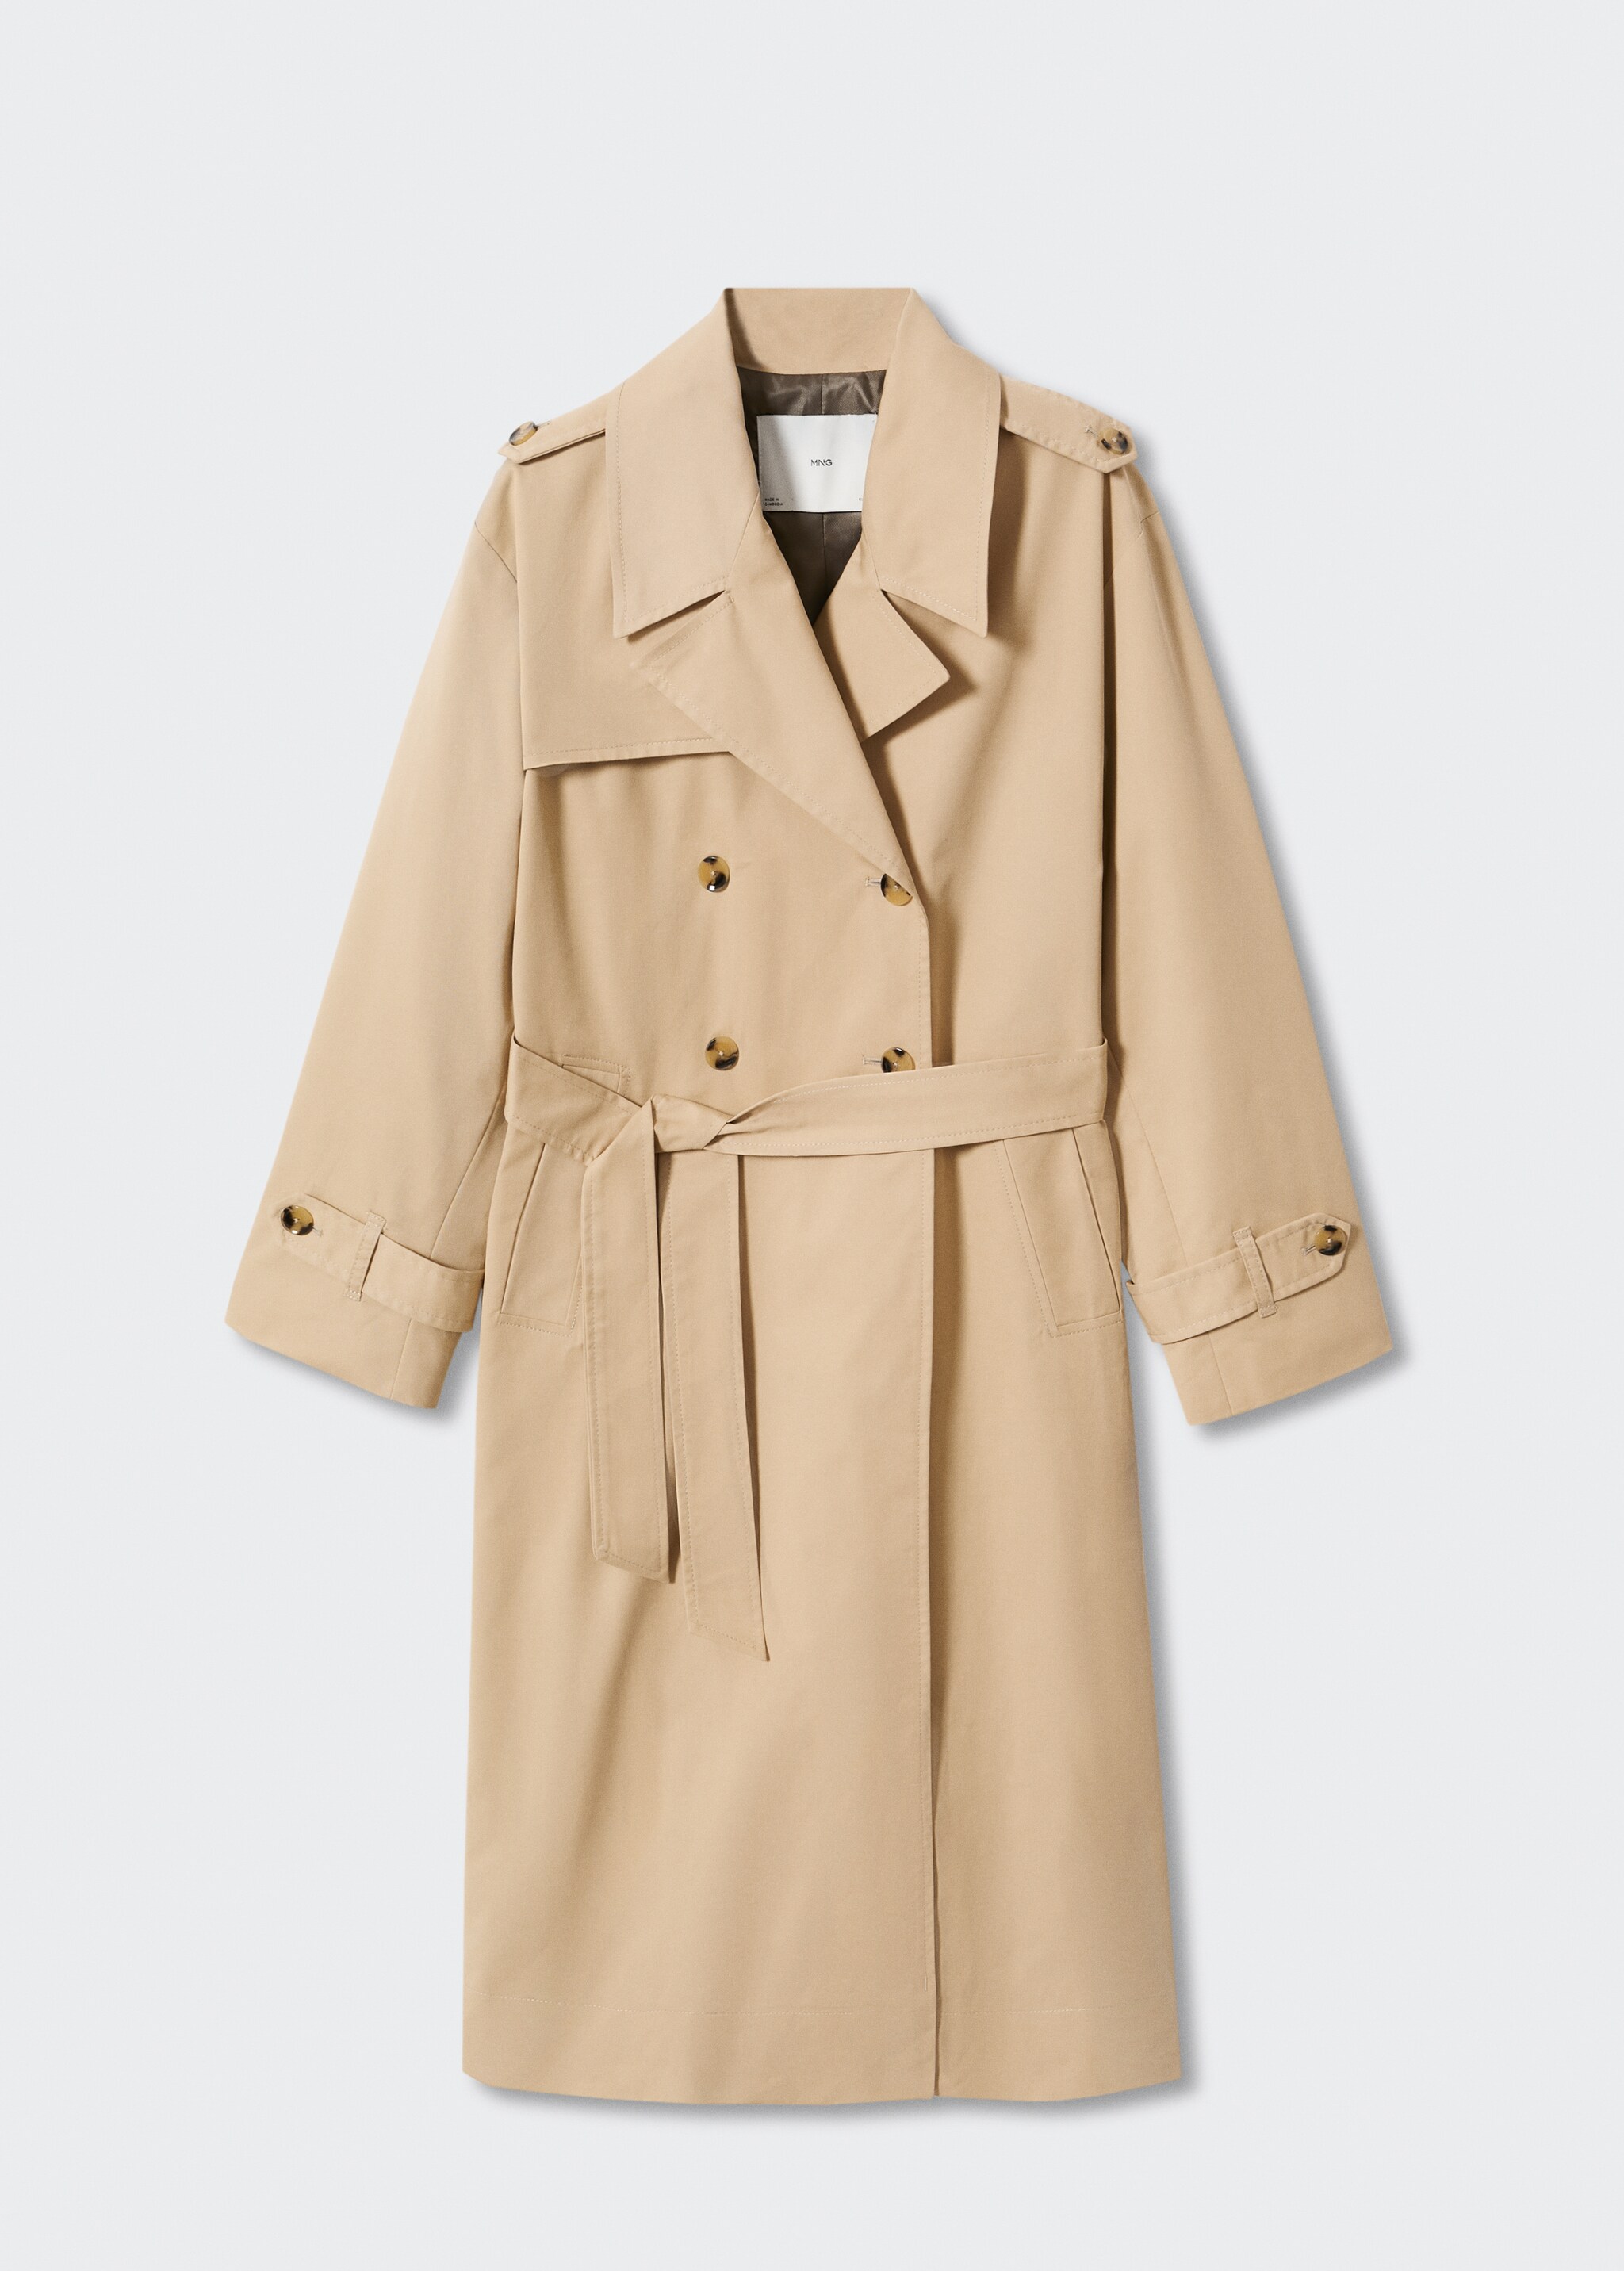 Cotton classic trench coat - Article without model